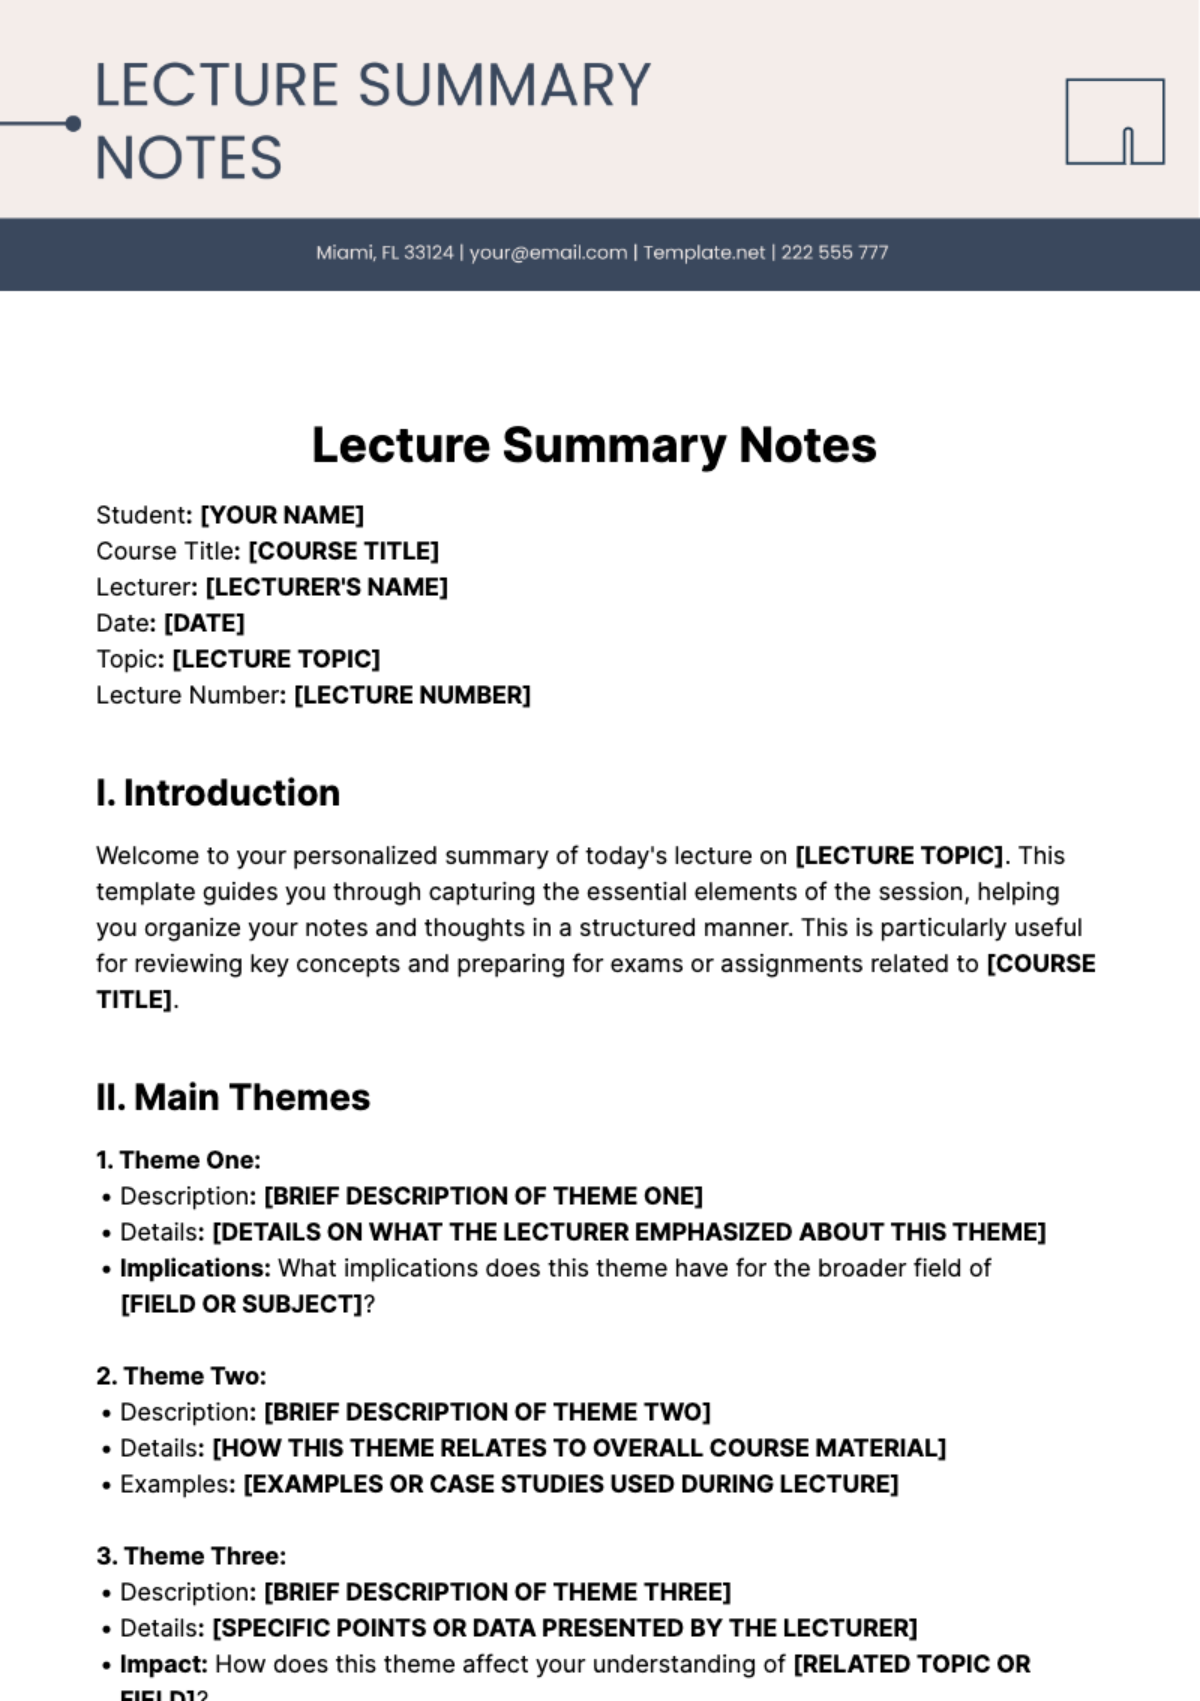 Lecture Summary Notes Template